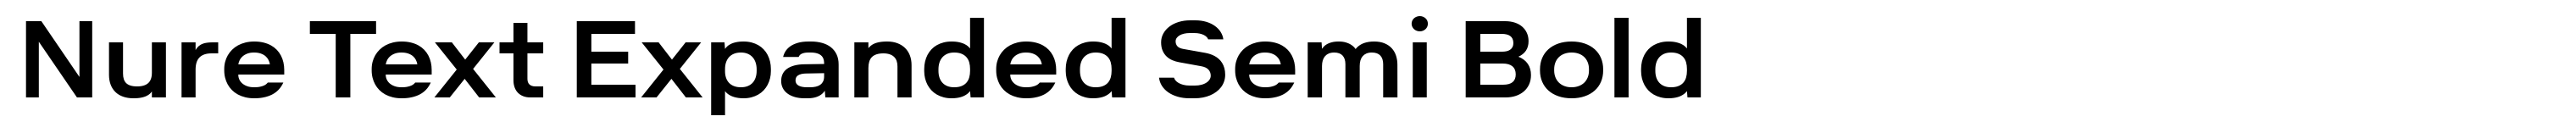 Nure Text Expanded Semi Bold